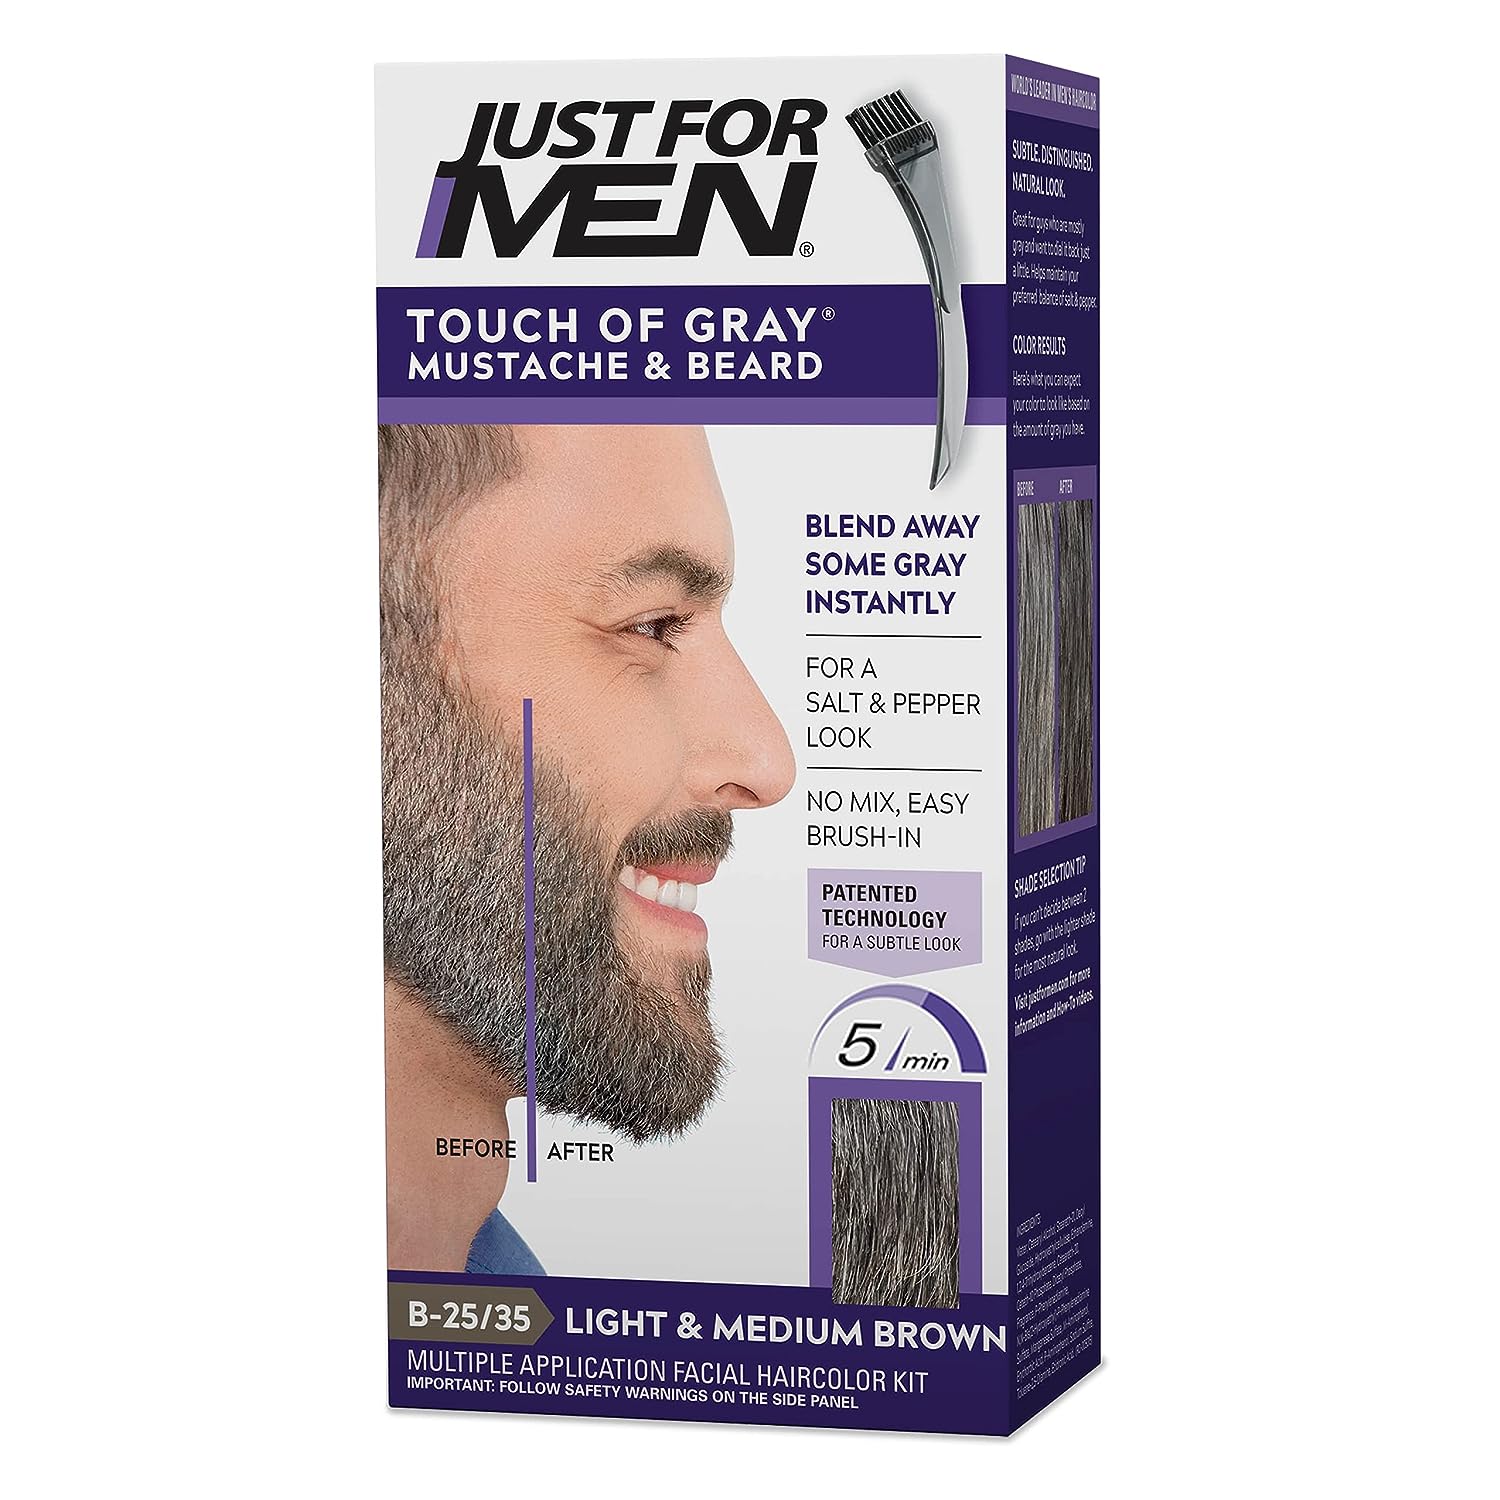 Just For Men Touch of Gray Mus…